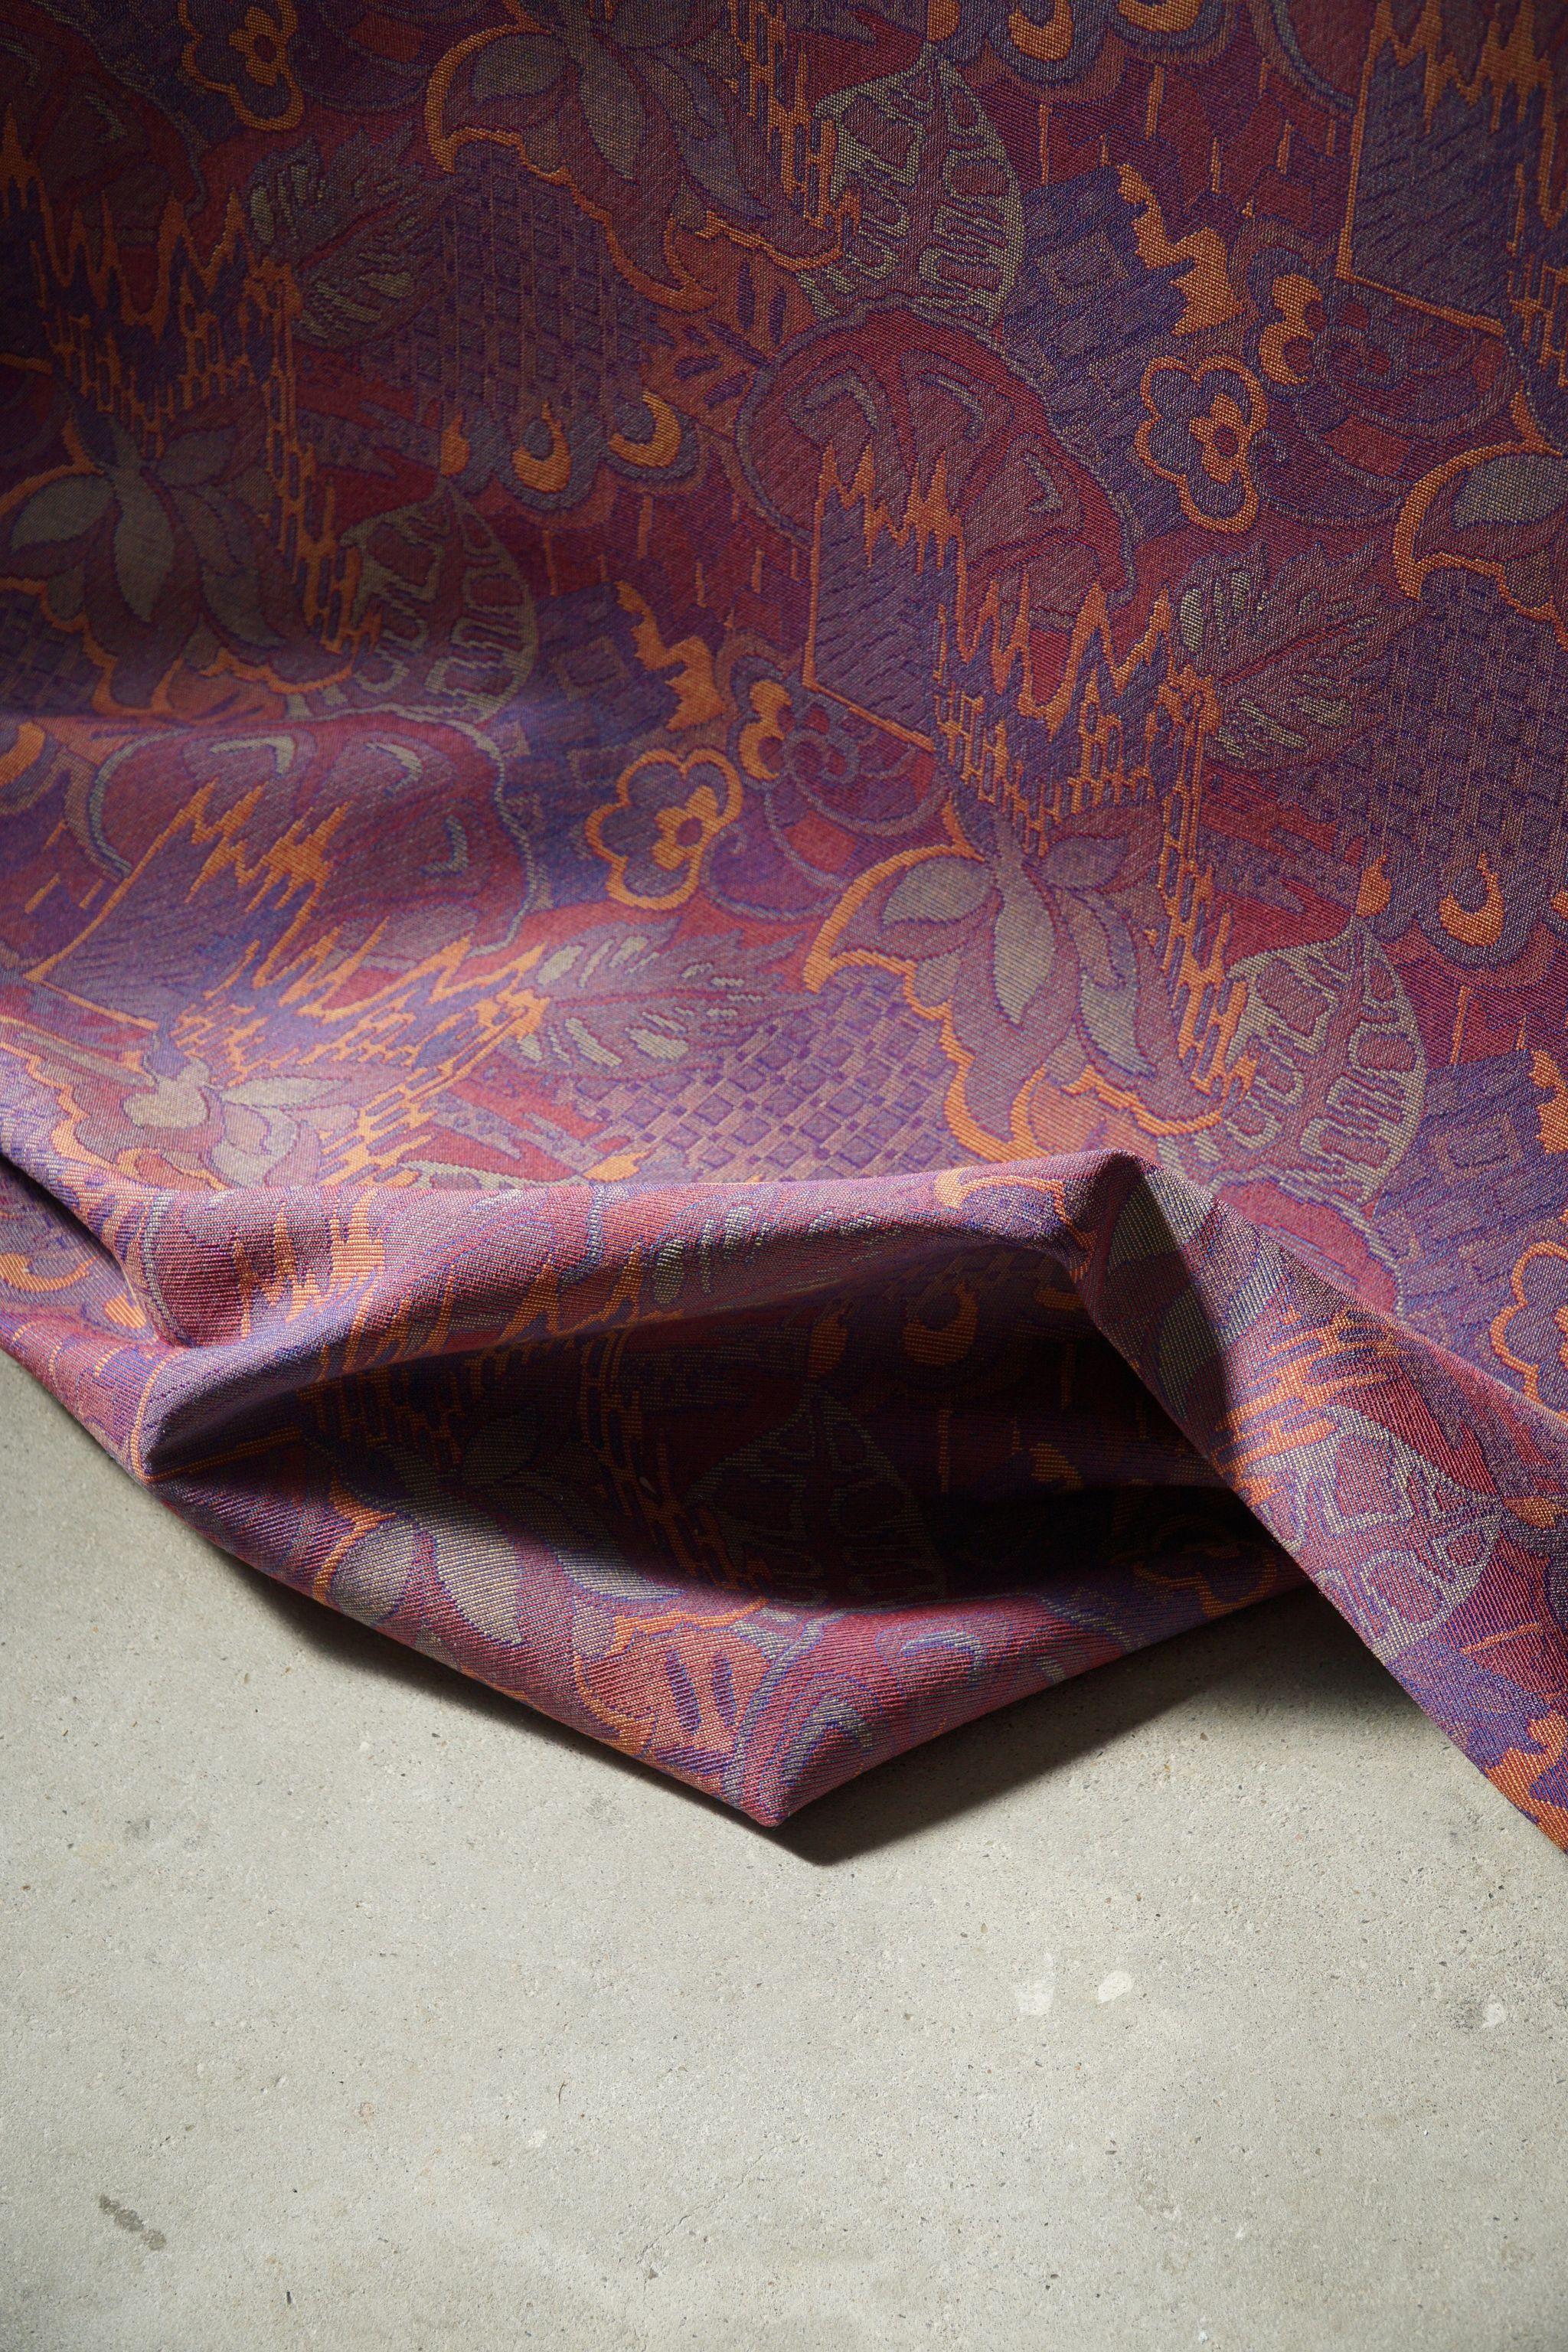 Cotton Vintage Gobelin Upholstery Fabric in Various Purple & Orange Colors, Late 20th C For Sale